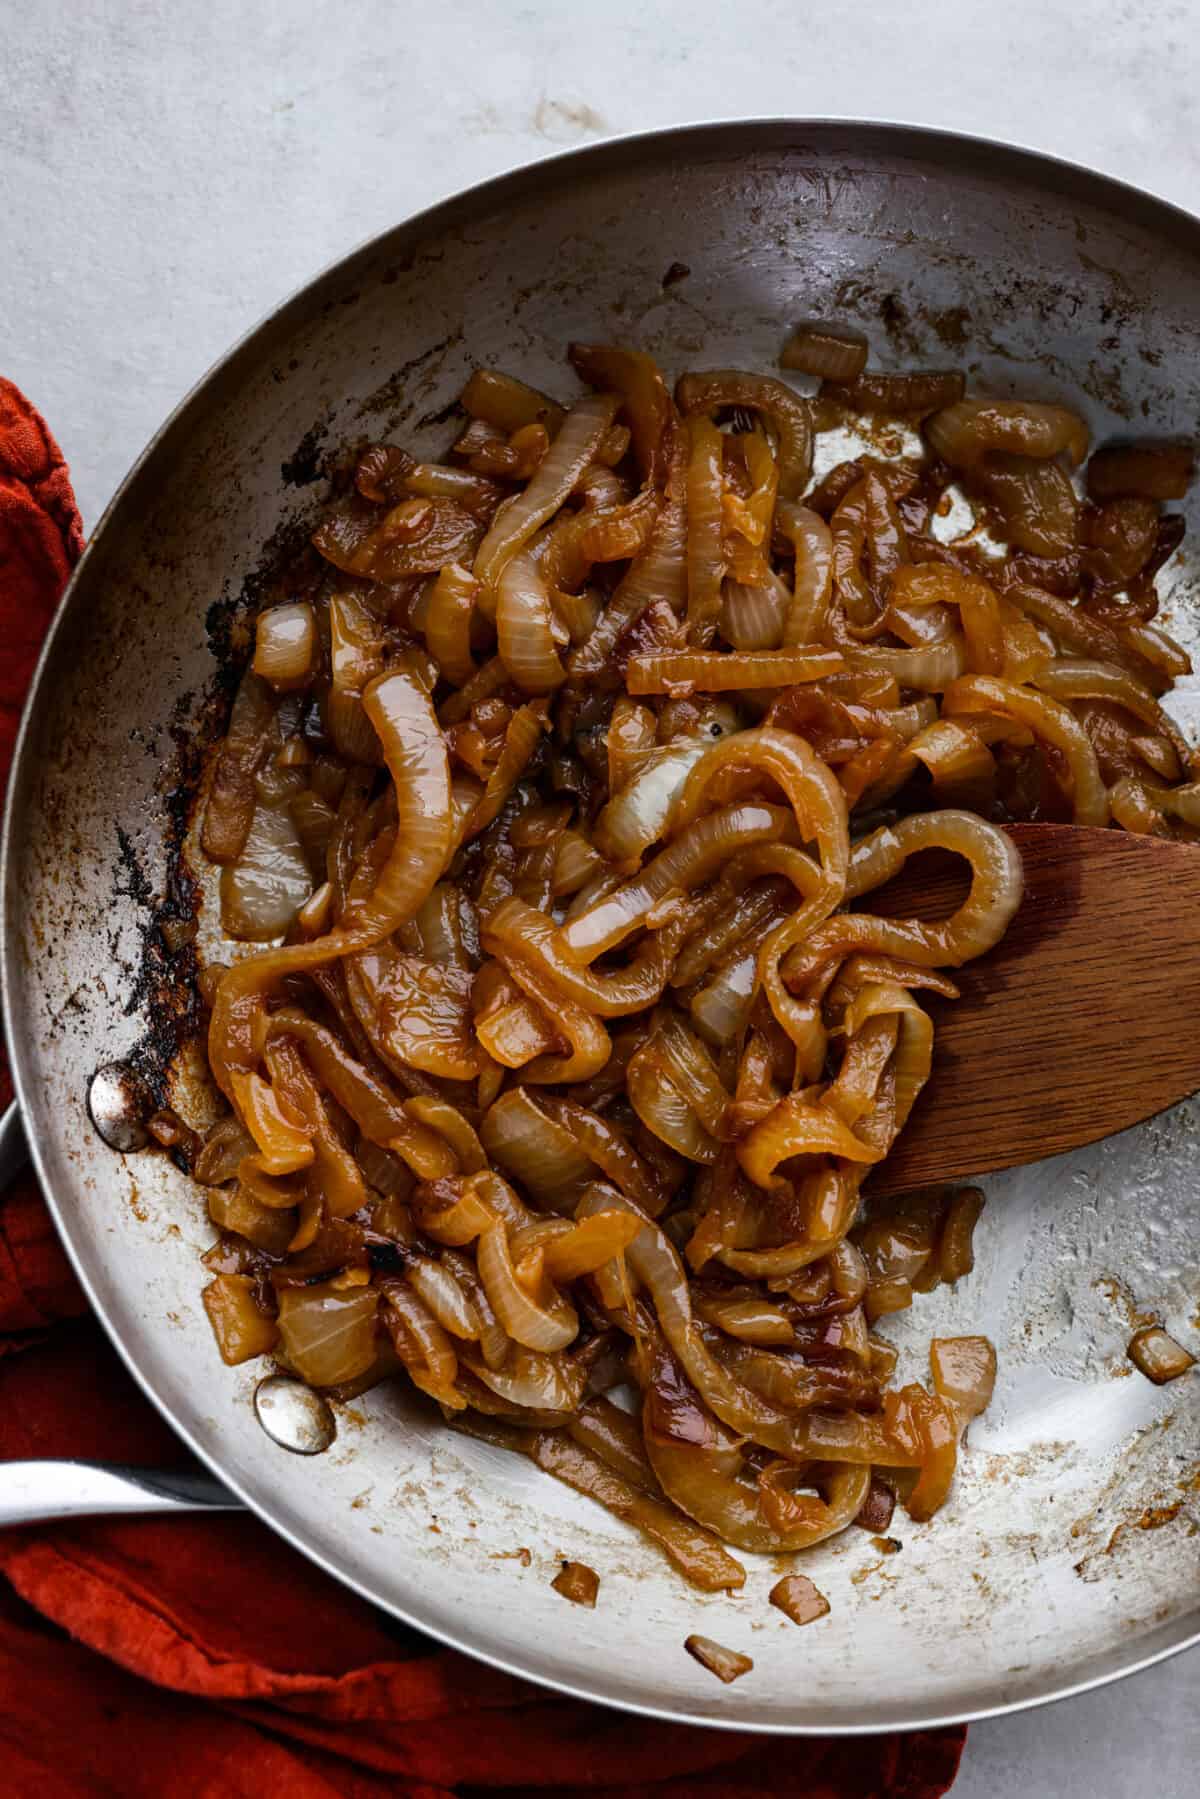 Caramelized onions being stirred with a wooden spoon in a metal pan.